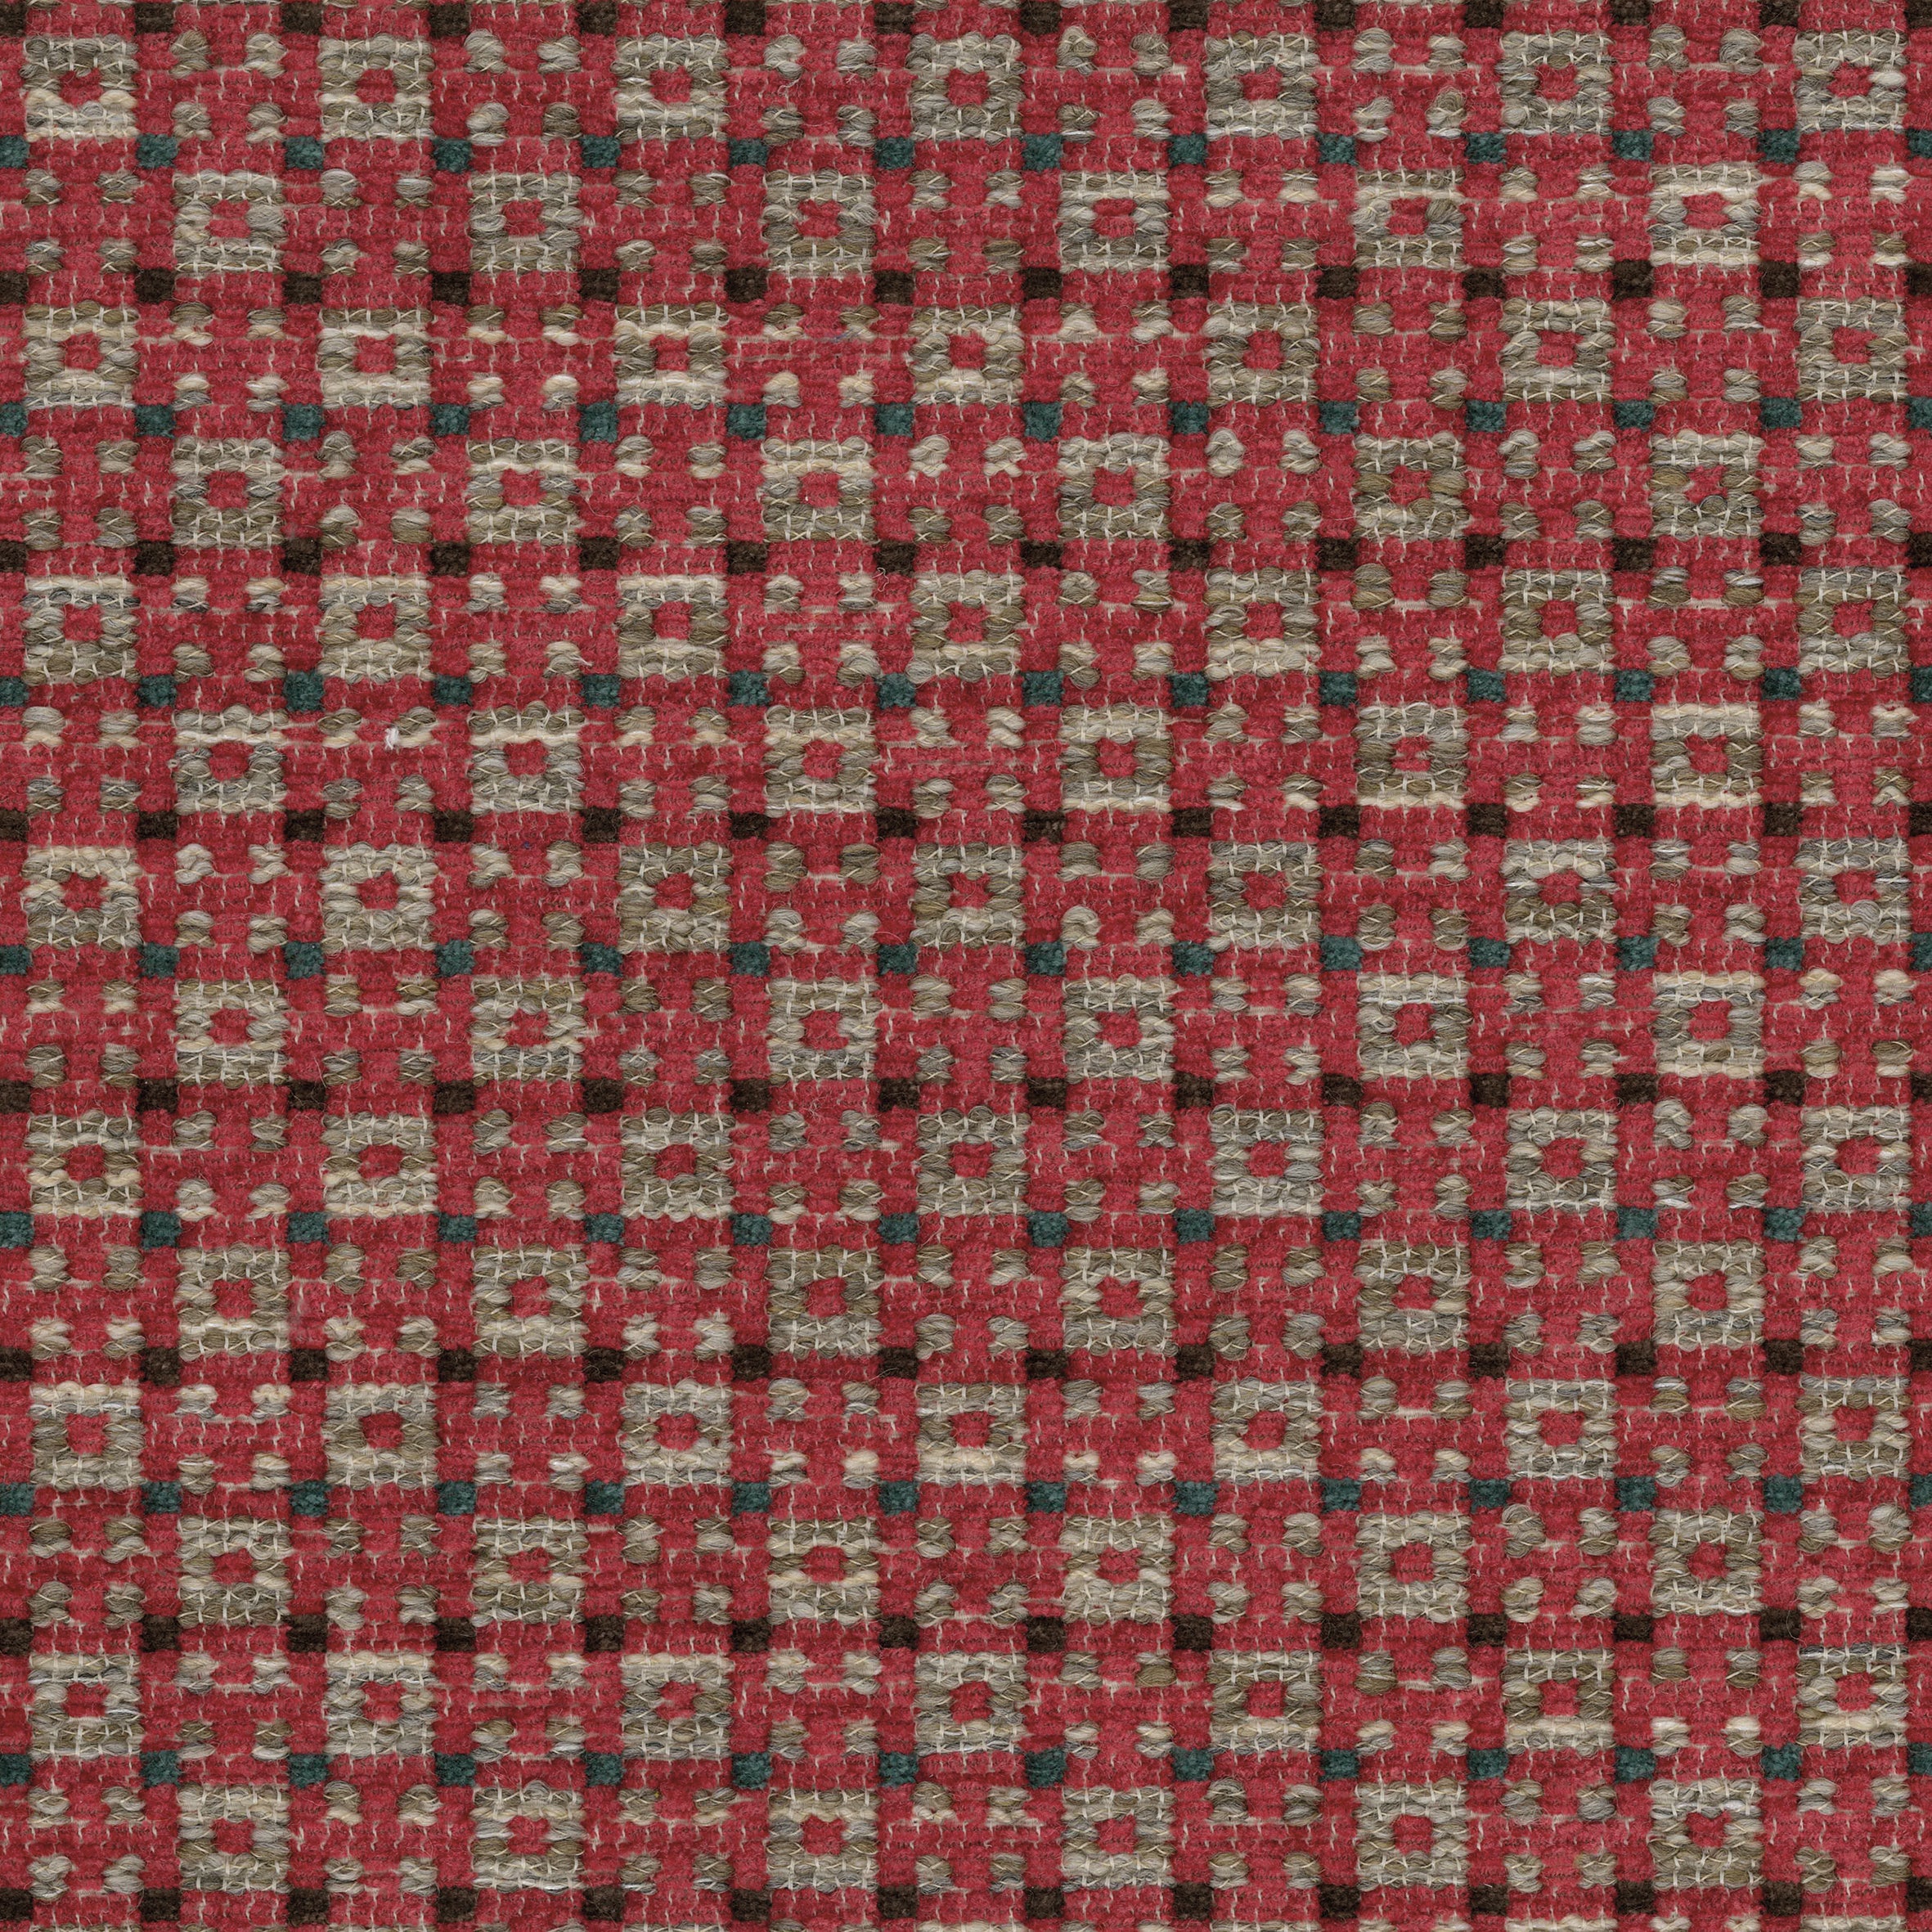 Nina Campbell Fabric - Dallimore Weaves Chiddingstone Red/Teal/Chocolate NCF4523-03